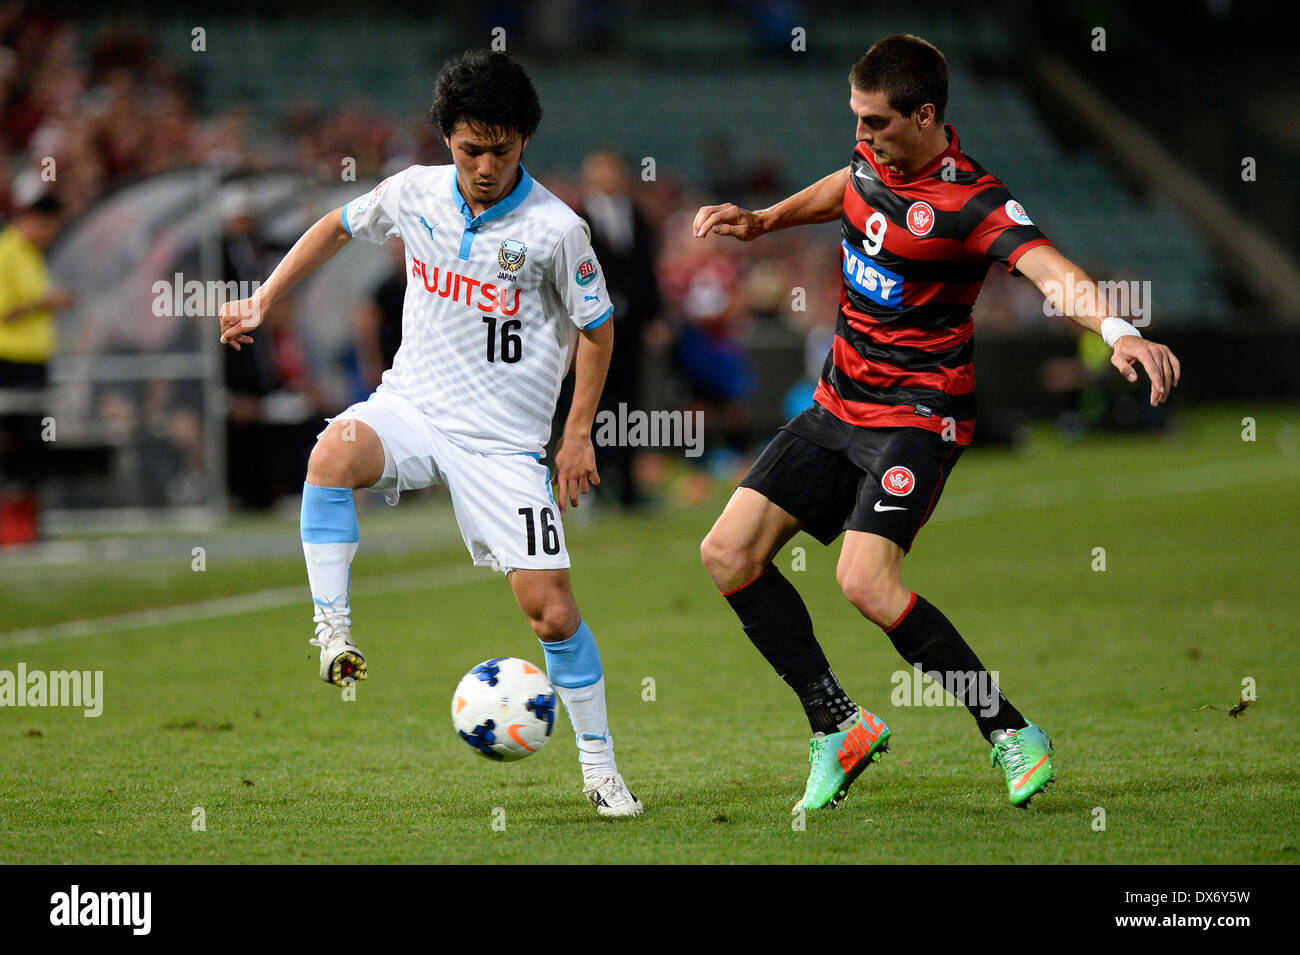 Sydney, Australia. 19th Mar, 2014. Kawasaki midfielder Ryota Oshima and Wanderers forward Tomi Juric in action during the AFC Champions League game between Western Sydney Wanderers FC and Kawasaki Frontale FC of Japan from the Pirtek Stadium, Parramatta. Wanderers won 1-0. Credit:  Action Plus Sports/Alamy Live News Stock Photo